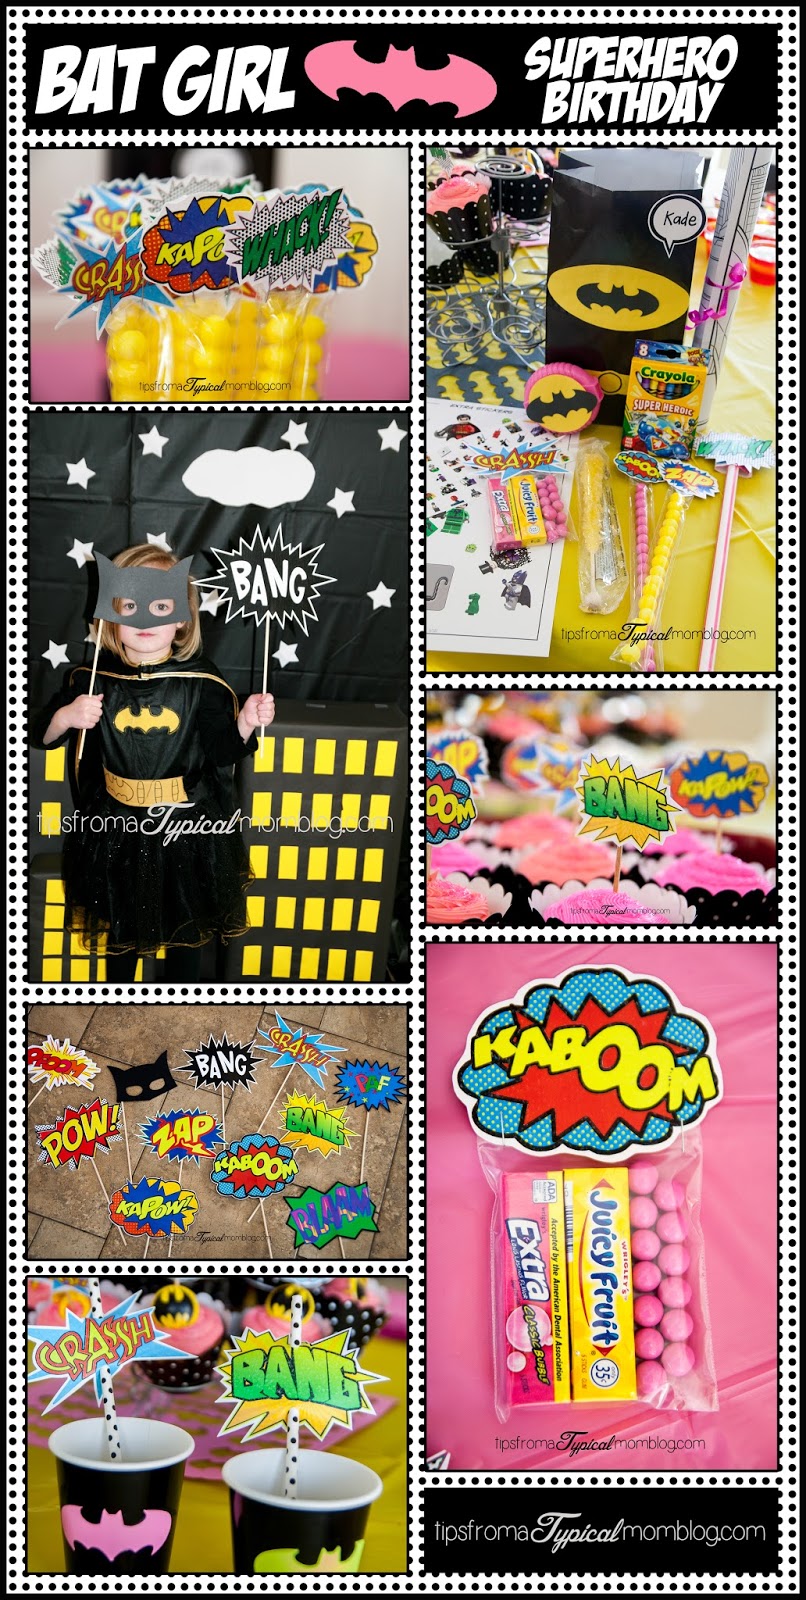 Superhero Birthday Party Ideas for a girl who loves Bat Man. Great free printables and games. Tips From a Typical Mom.